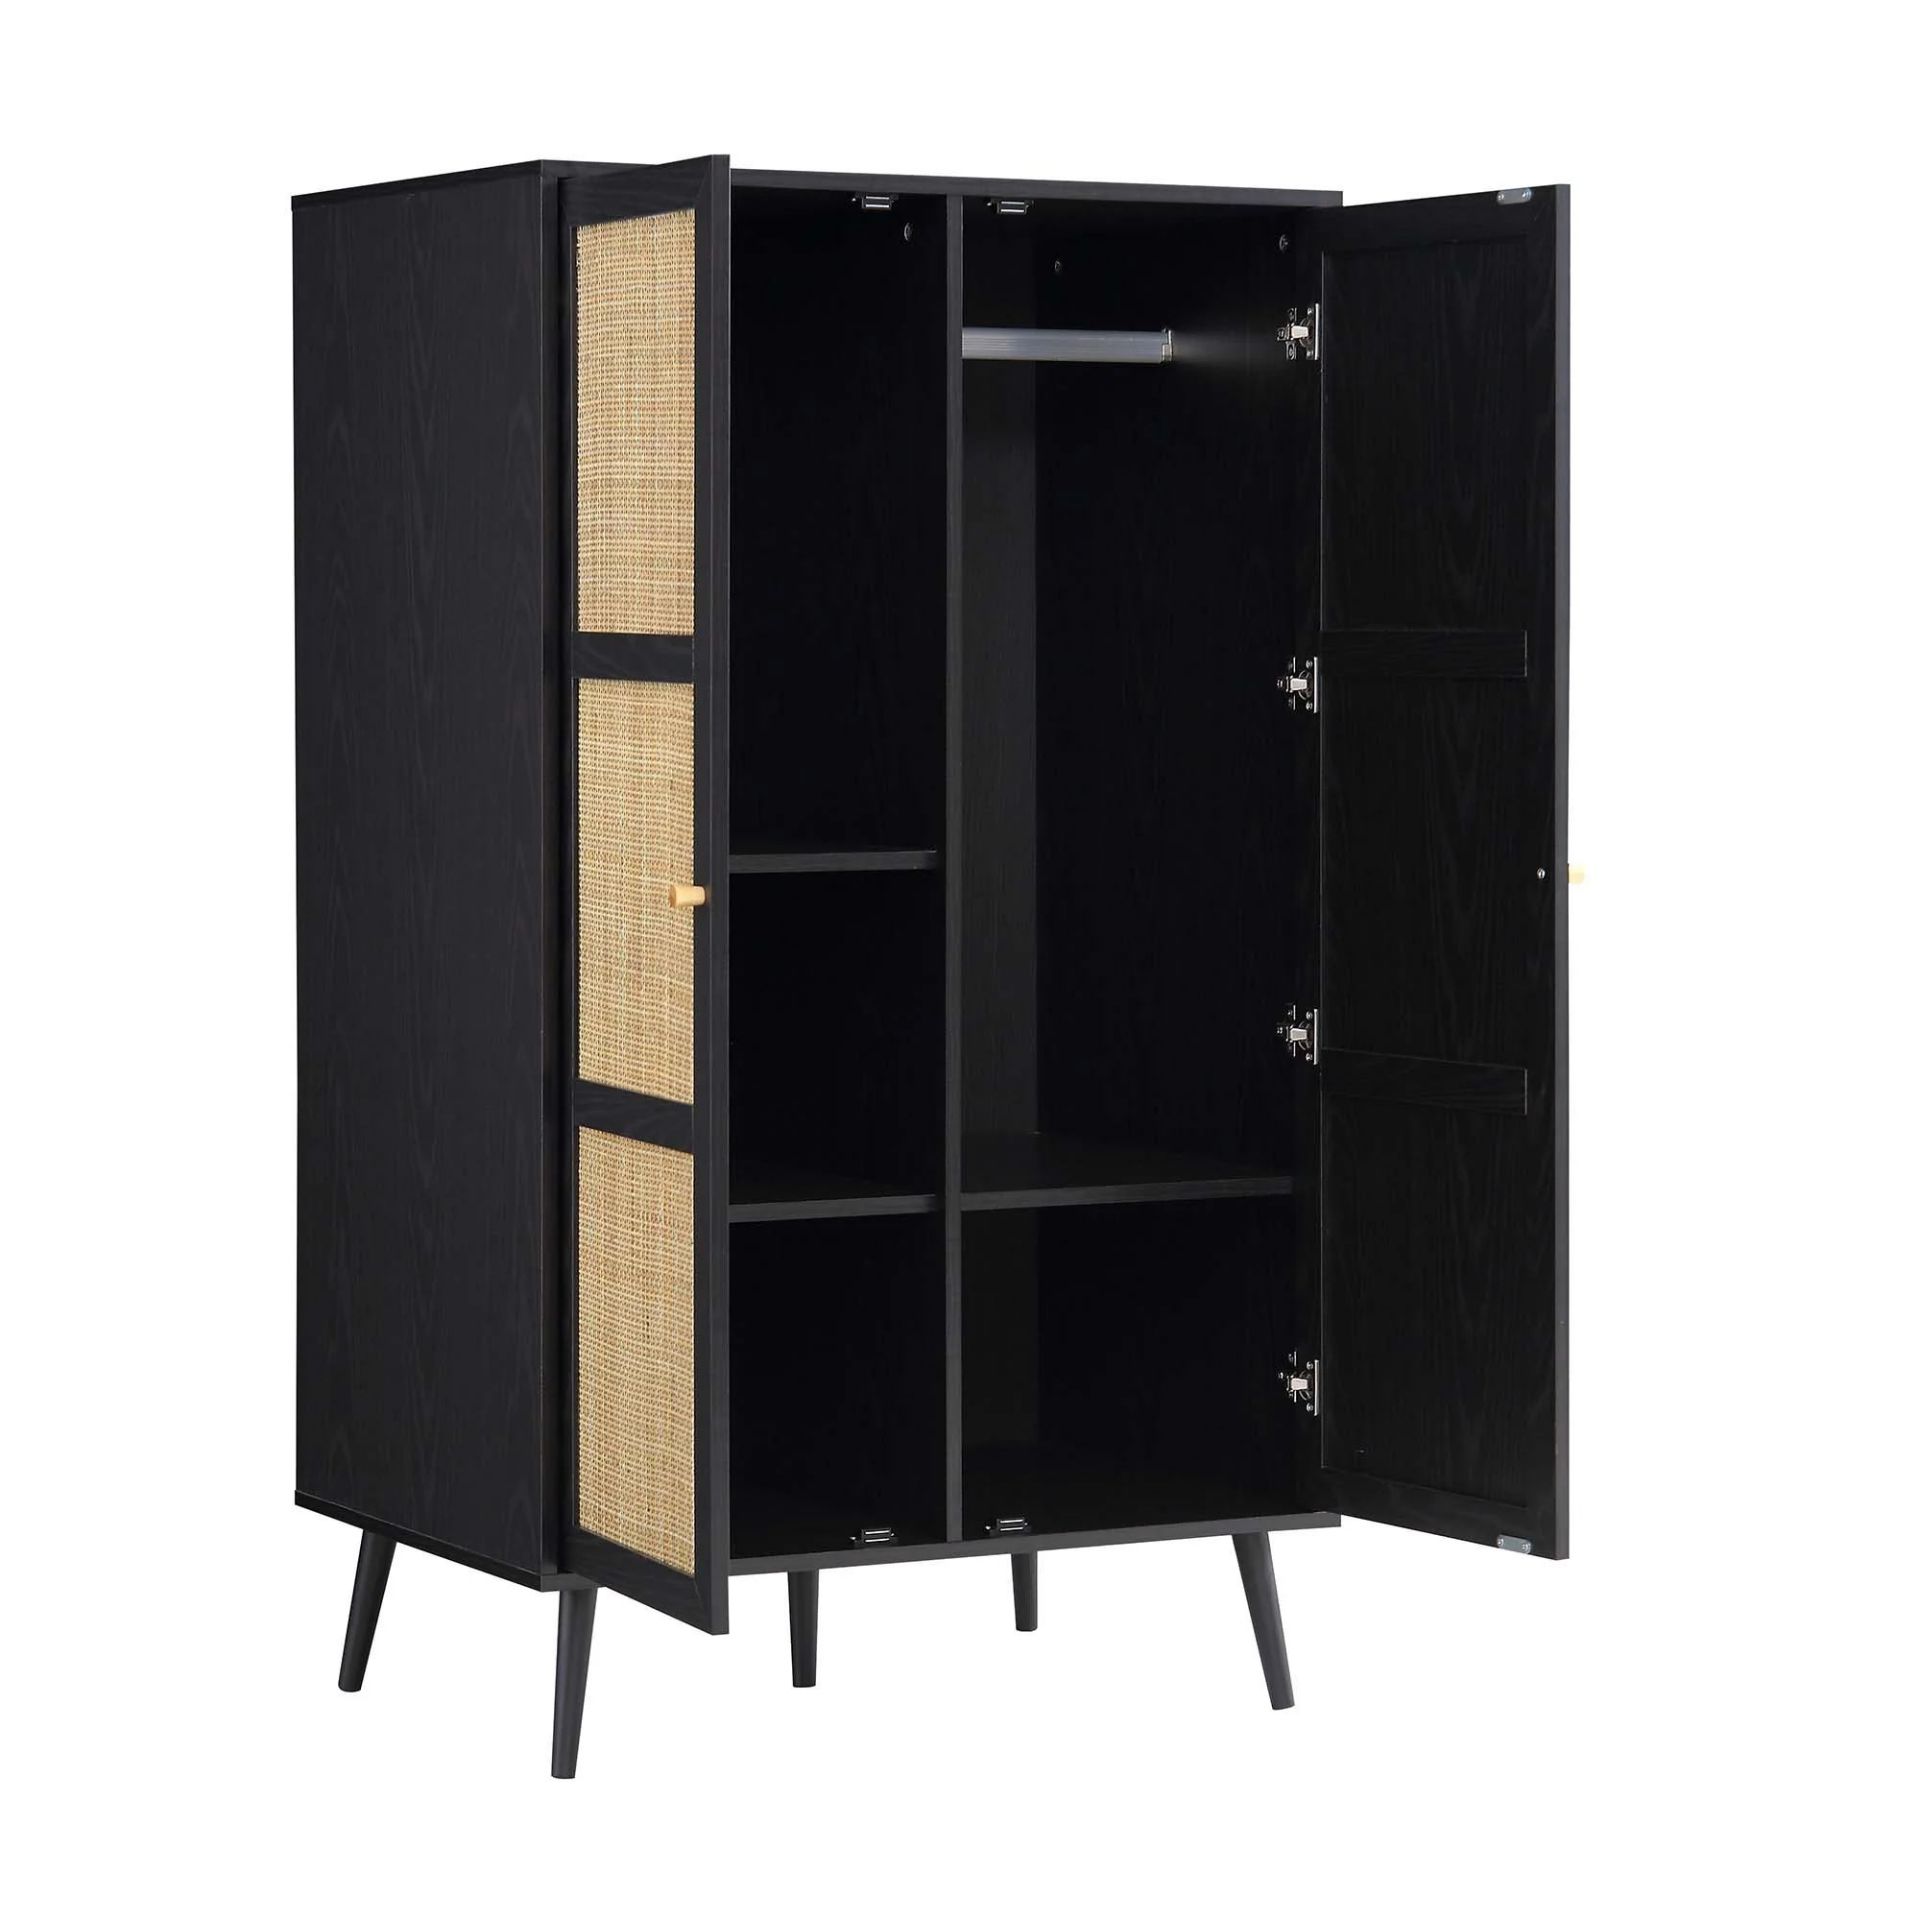 Frances Woven Rattan Compact Double Wardrobe, Black. -R14. RRP £379.99. Crafted from wood and - Bild 2 aus 2